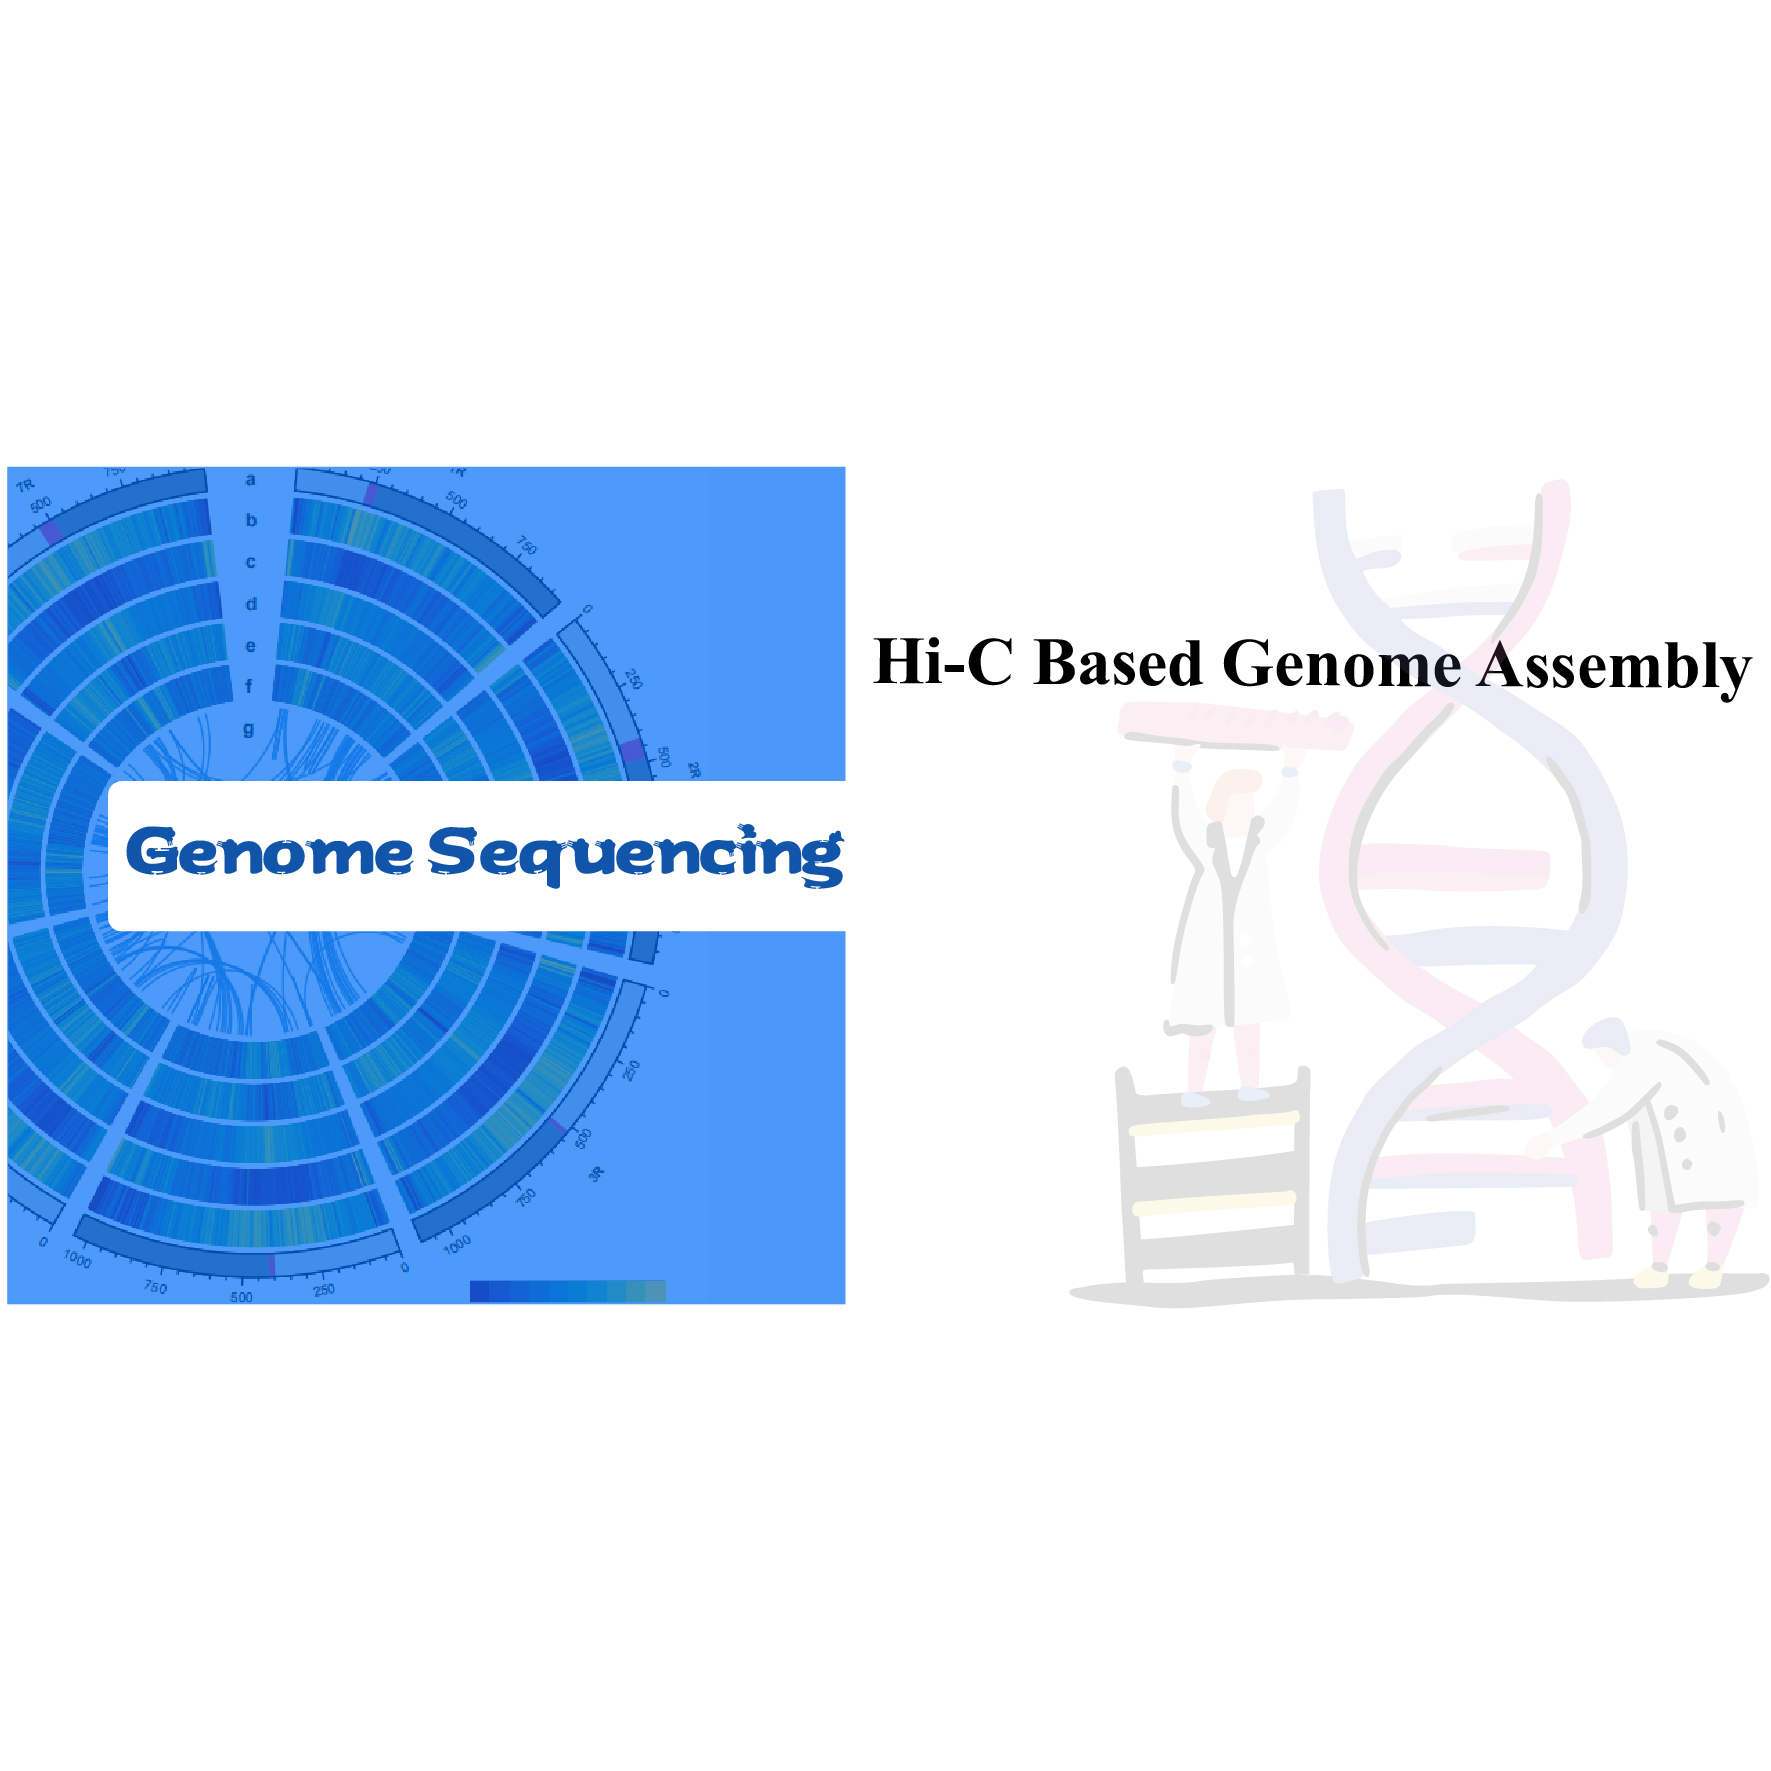 Hi-C basearre Genome Assembly Featured Image